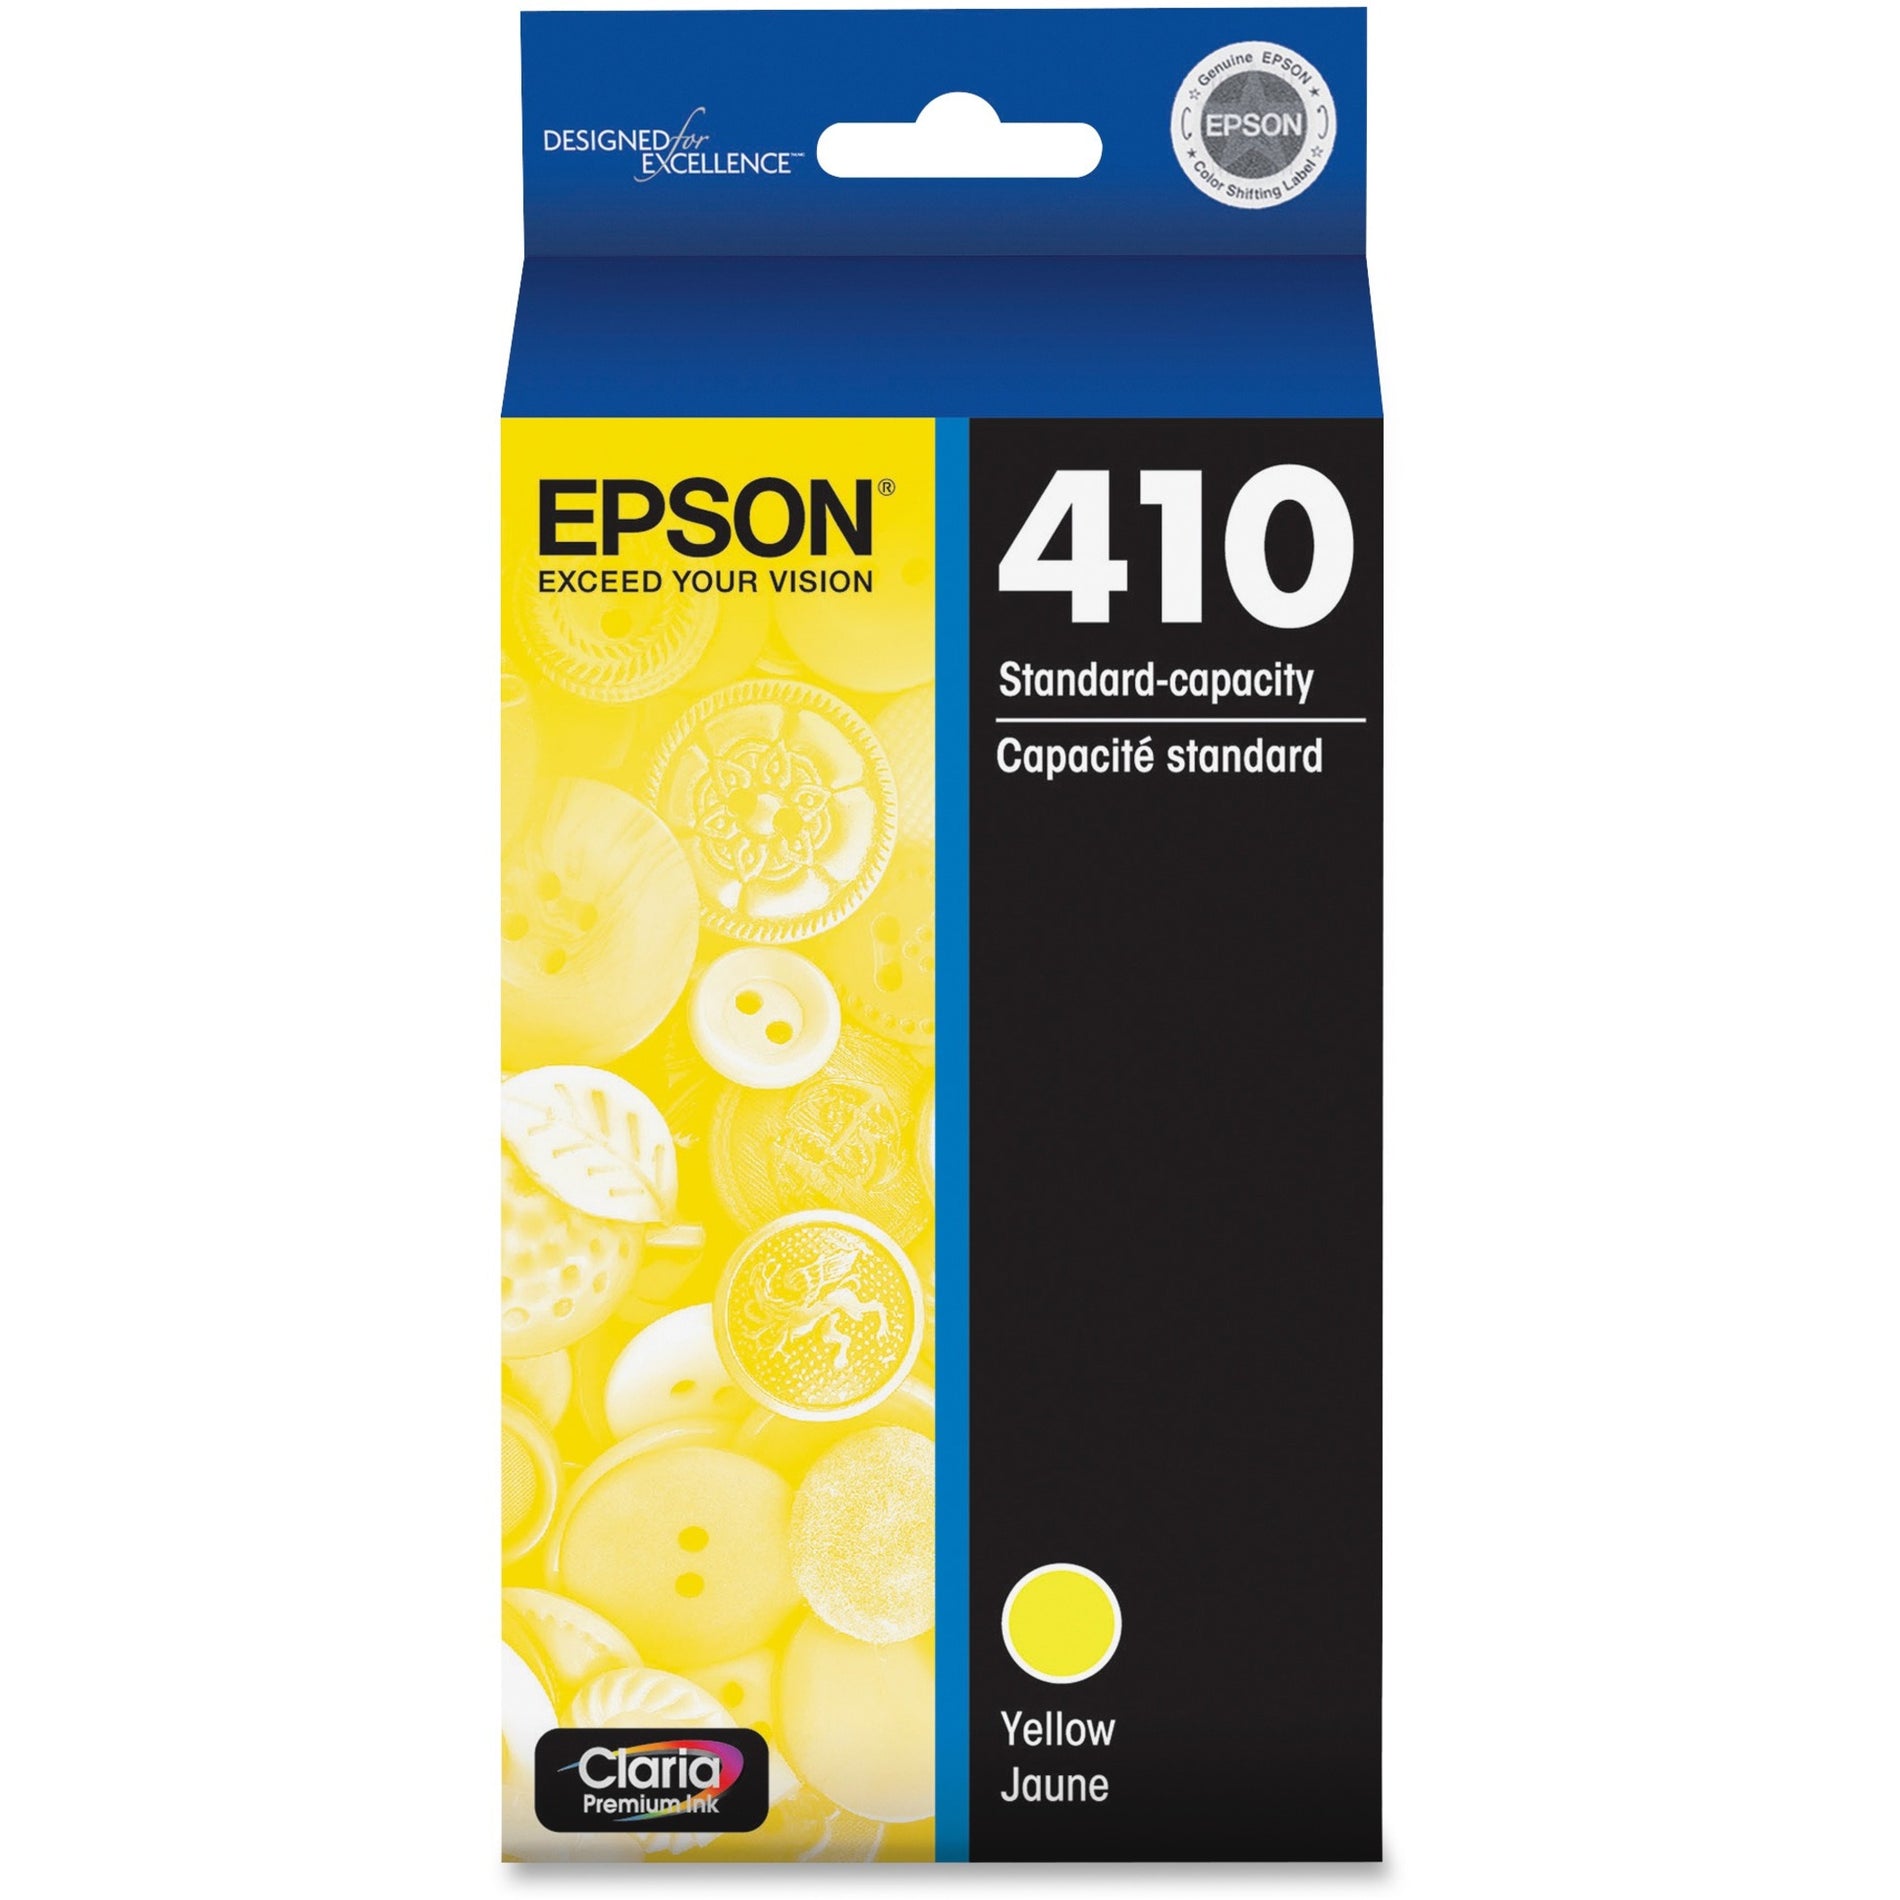 Epson T410420-S 410 Yellow Ink Cartridge, 300 Page Yield